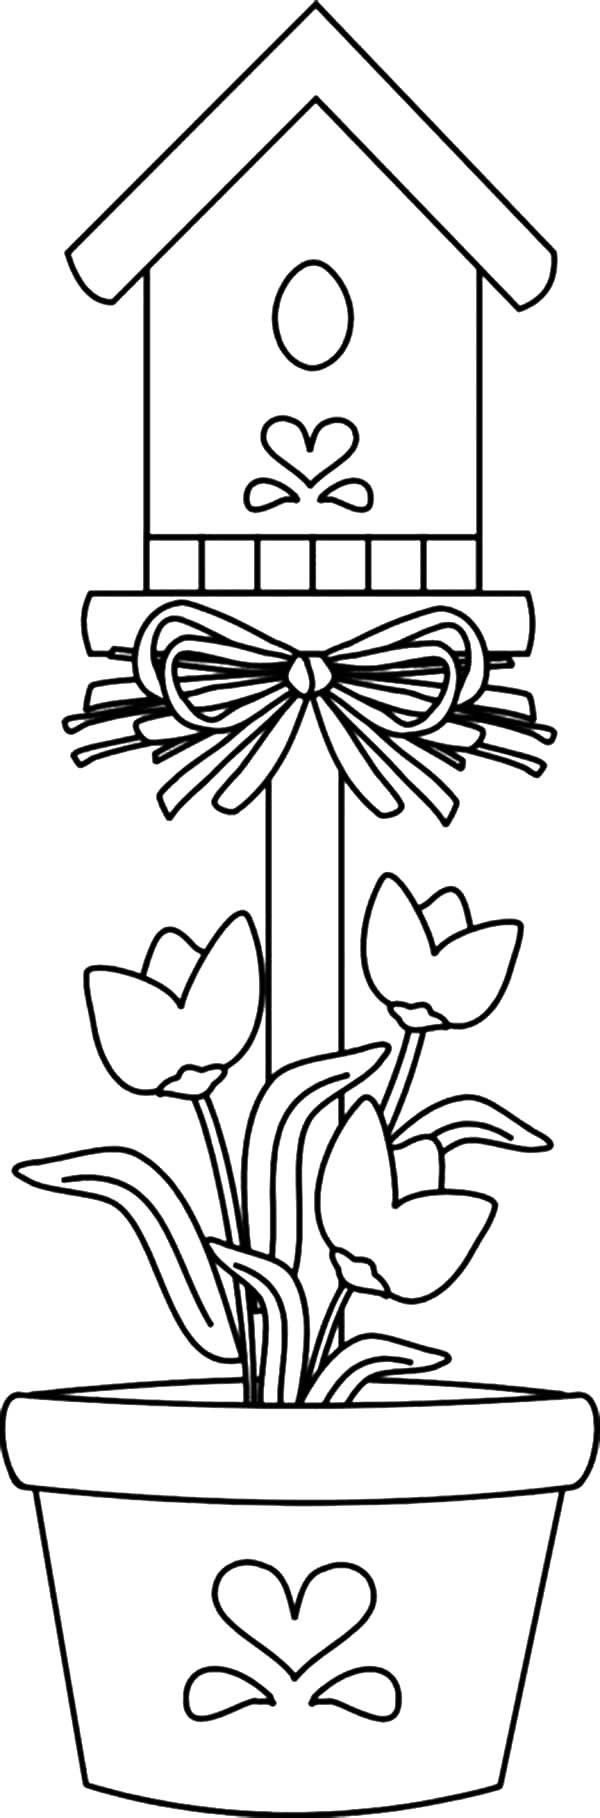 Download Birdhouse Coloring Page - Coloring Home